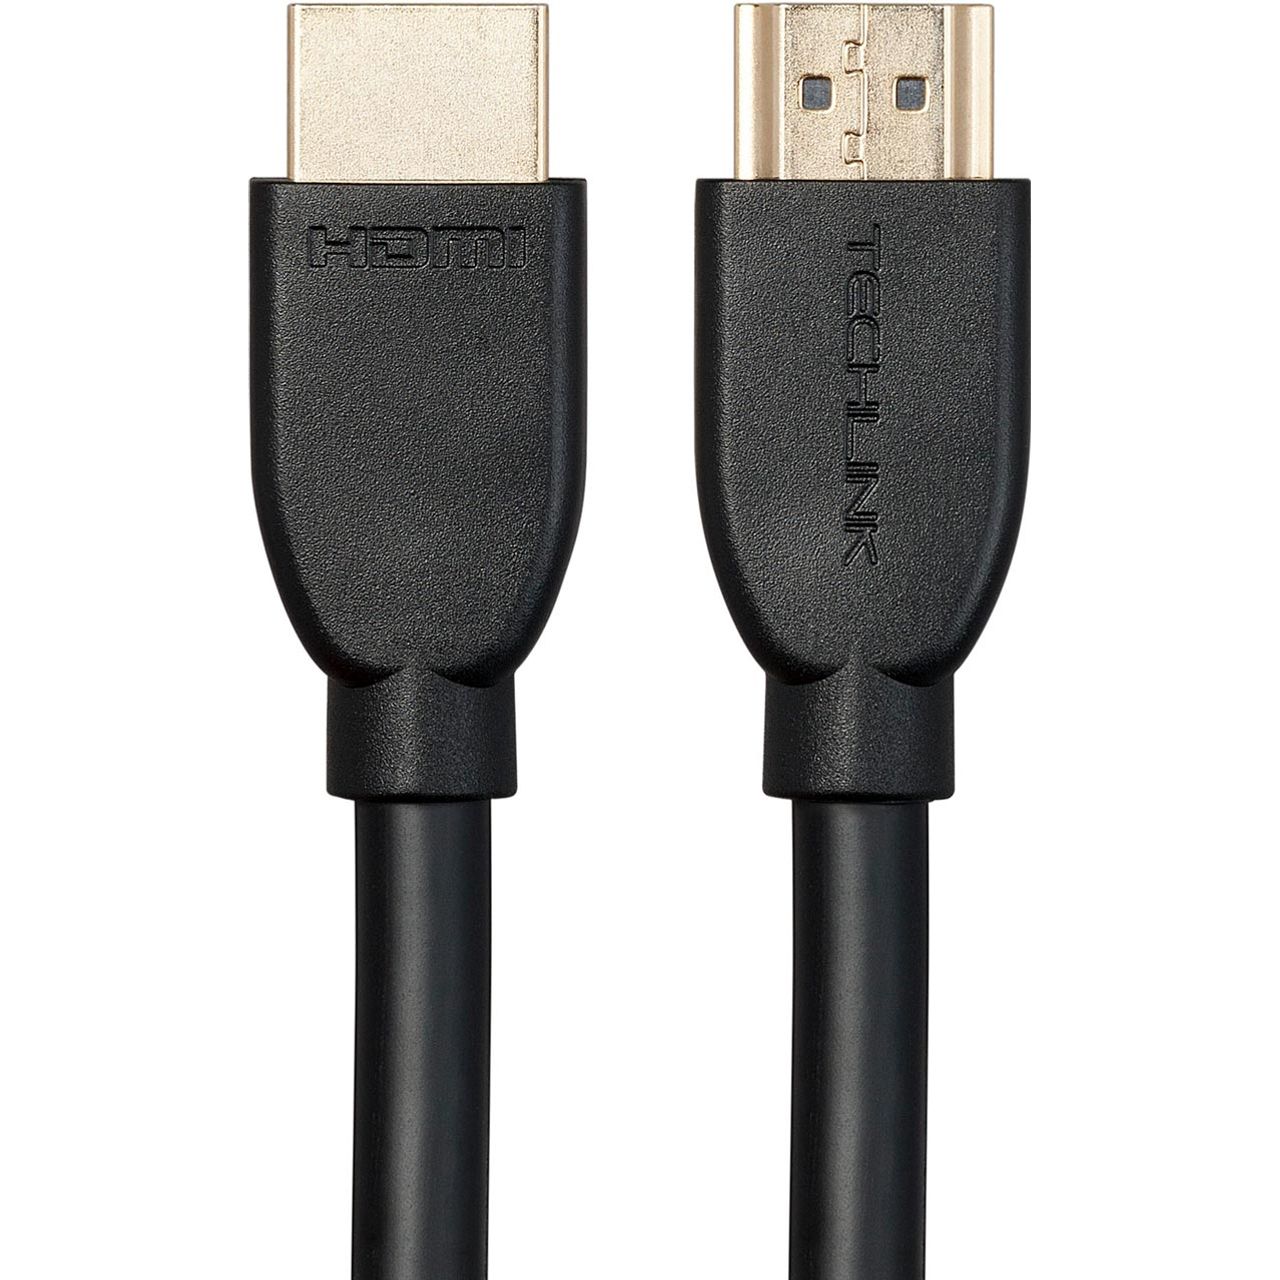 Techlink 103202 2m HDMI Cable Review